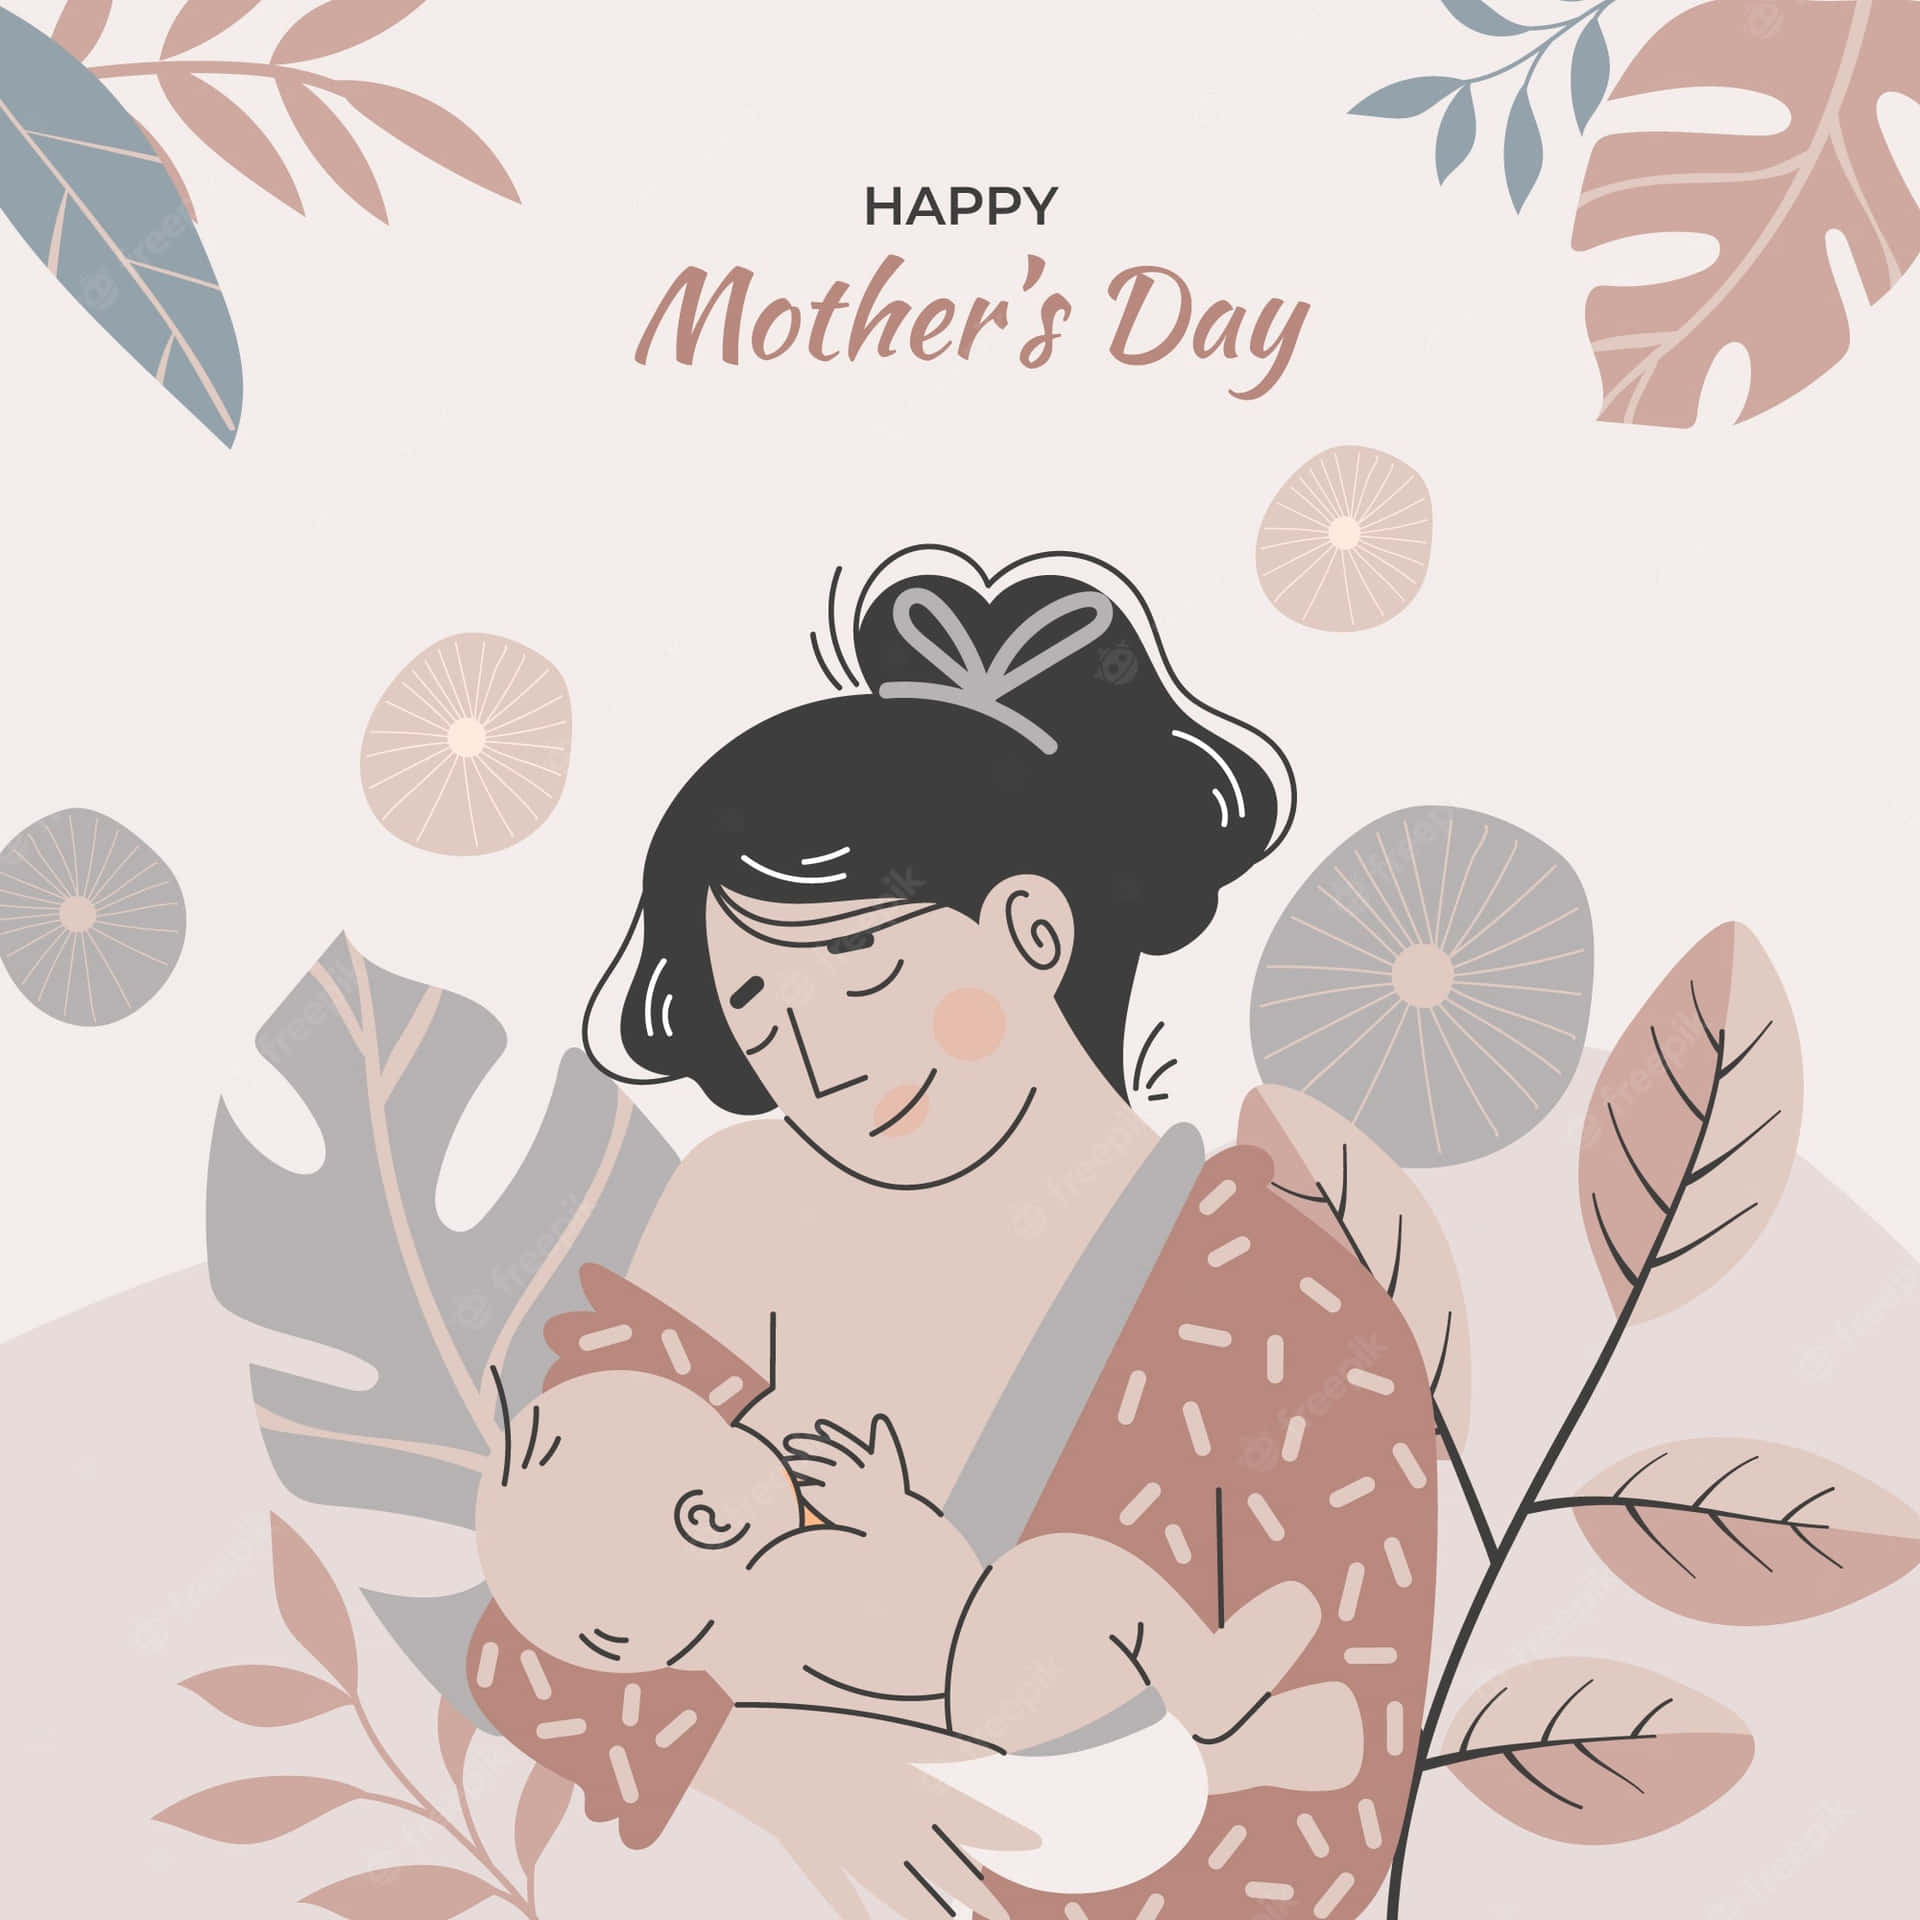 Happy Mother's Day Card With A Mother And Baby Wallpaper